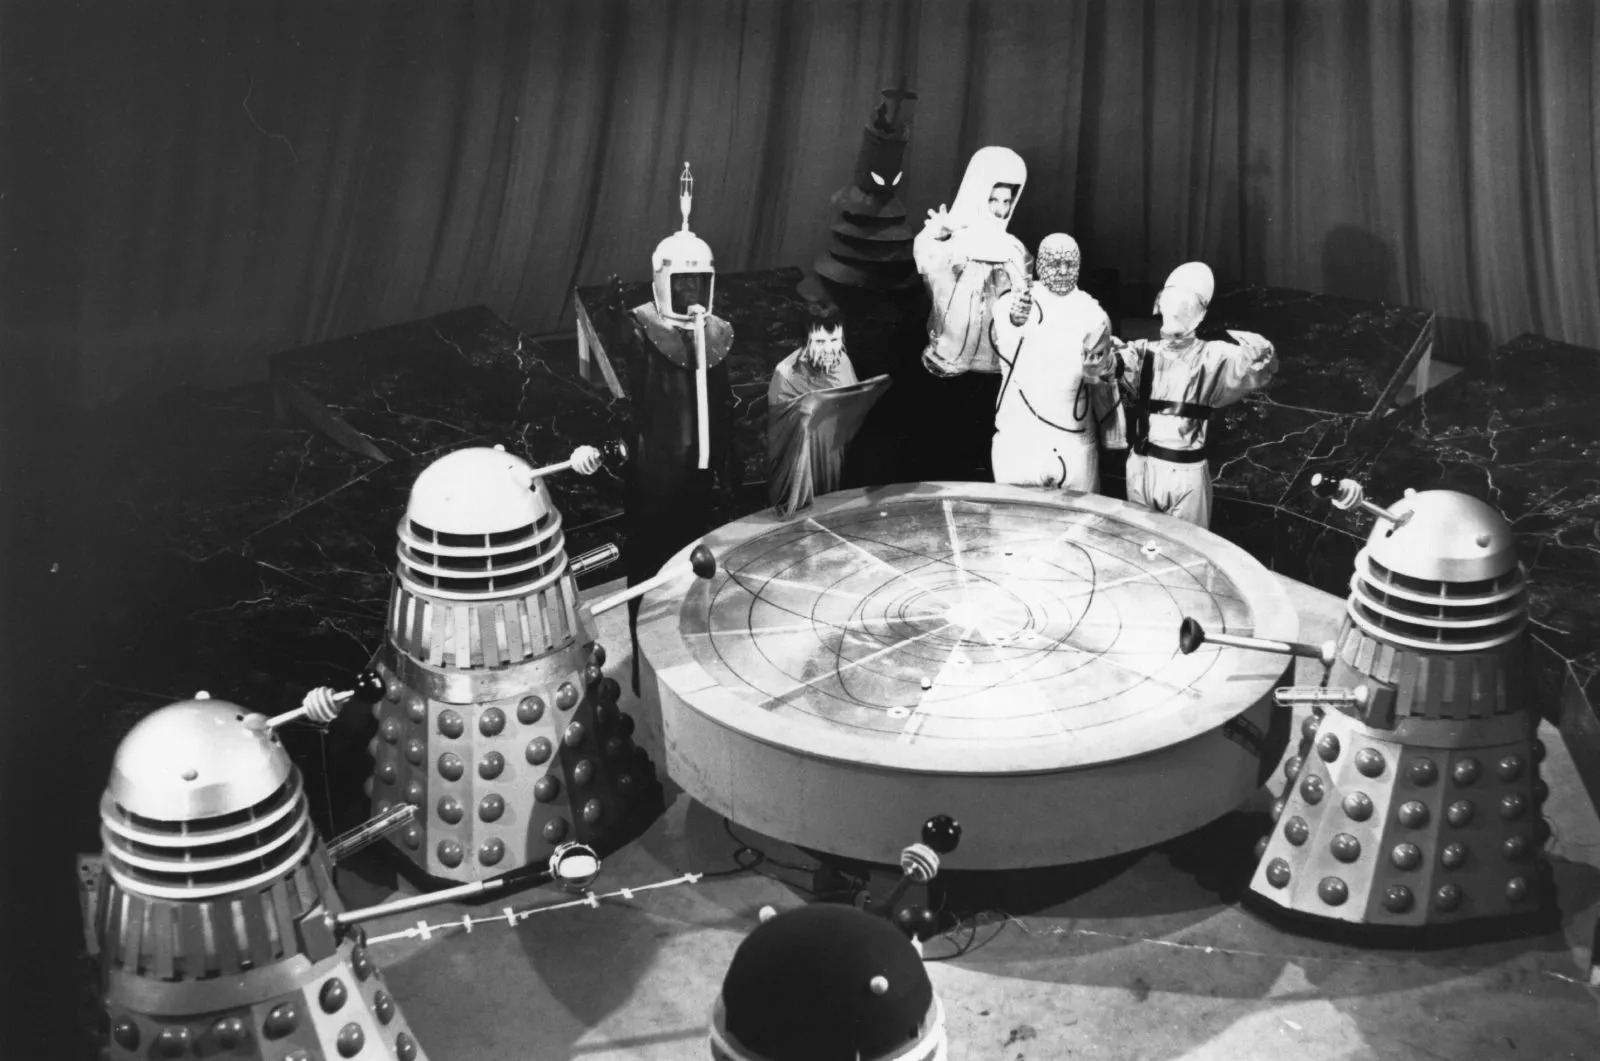 Screencap from Mission to the Unknown (Original): a wide open conference room shows 6 characters and 3 Daleks (as well as one black Dalek) around a round table with some sort of star map on it, viewed from above. The alien characters are (from left to right): a person wearing some sort of diving helmet with an antenna on top; a short person with icicle-type appendages dangling from their face; an immensely tall person dressed in all black whose neck is ruffled and whose face only shows two angry white eyes; a man in a white radiation-type suit with his hand outstretched towards the camera; a bald man in a jumpsuit whose face is covered with dots, and who points a laser gun towards the camera; and someone wearing a wide helmet (or false head) that tapers up towards the back.